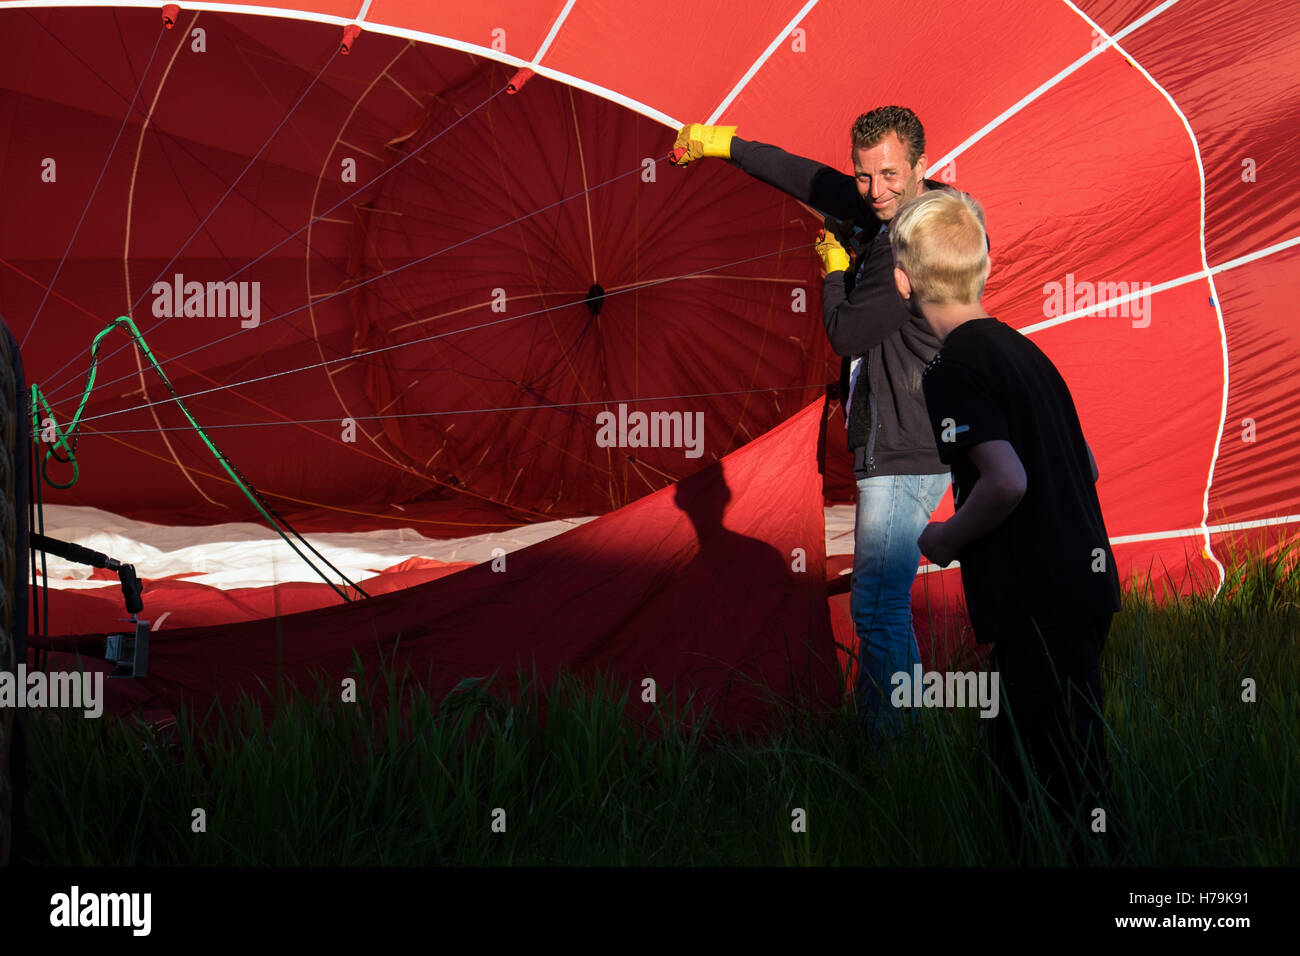 Air Ballooning, the Netherlands Stock Photo